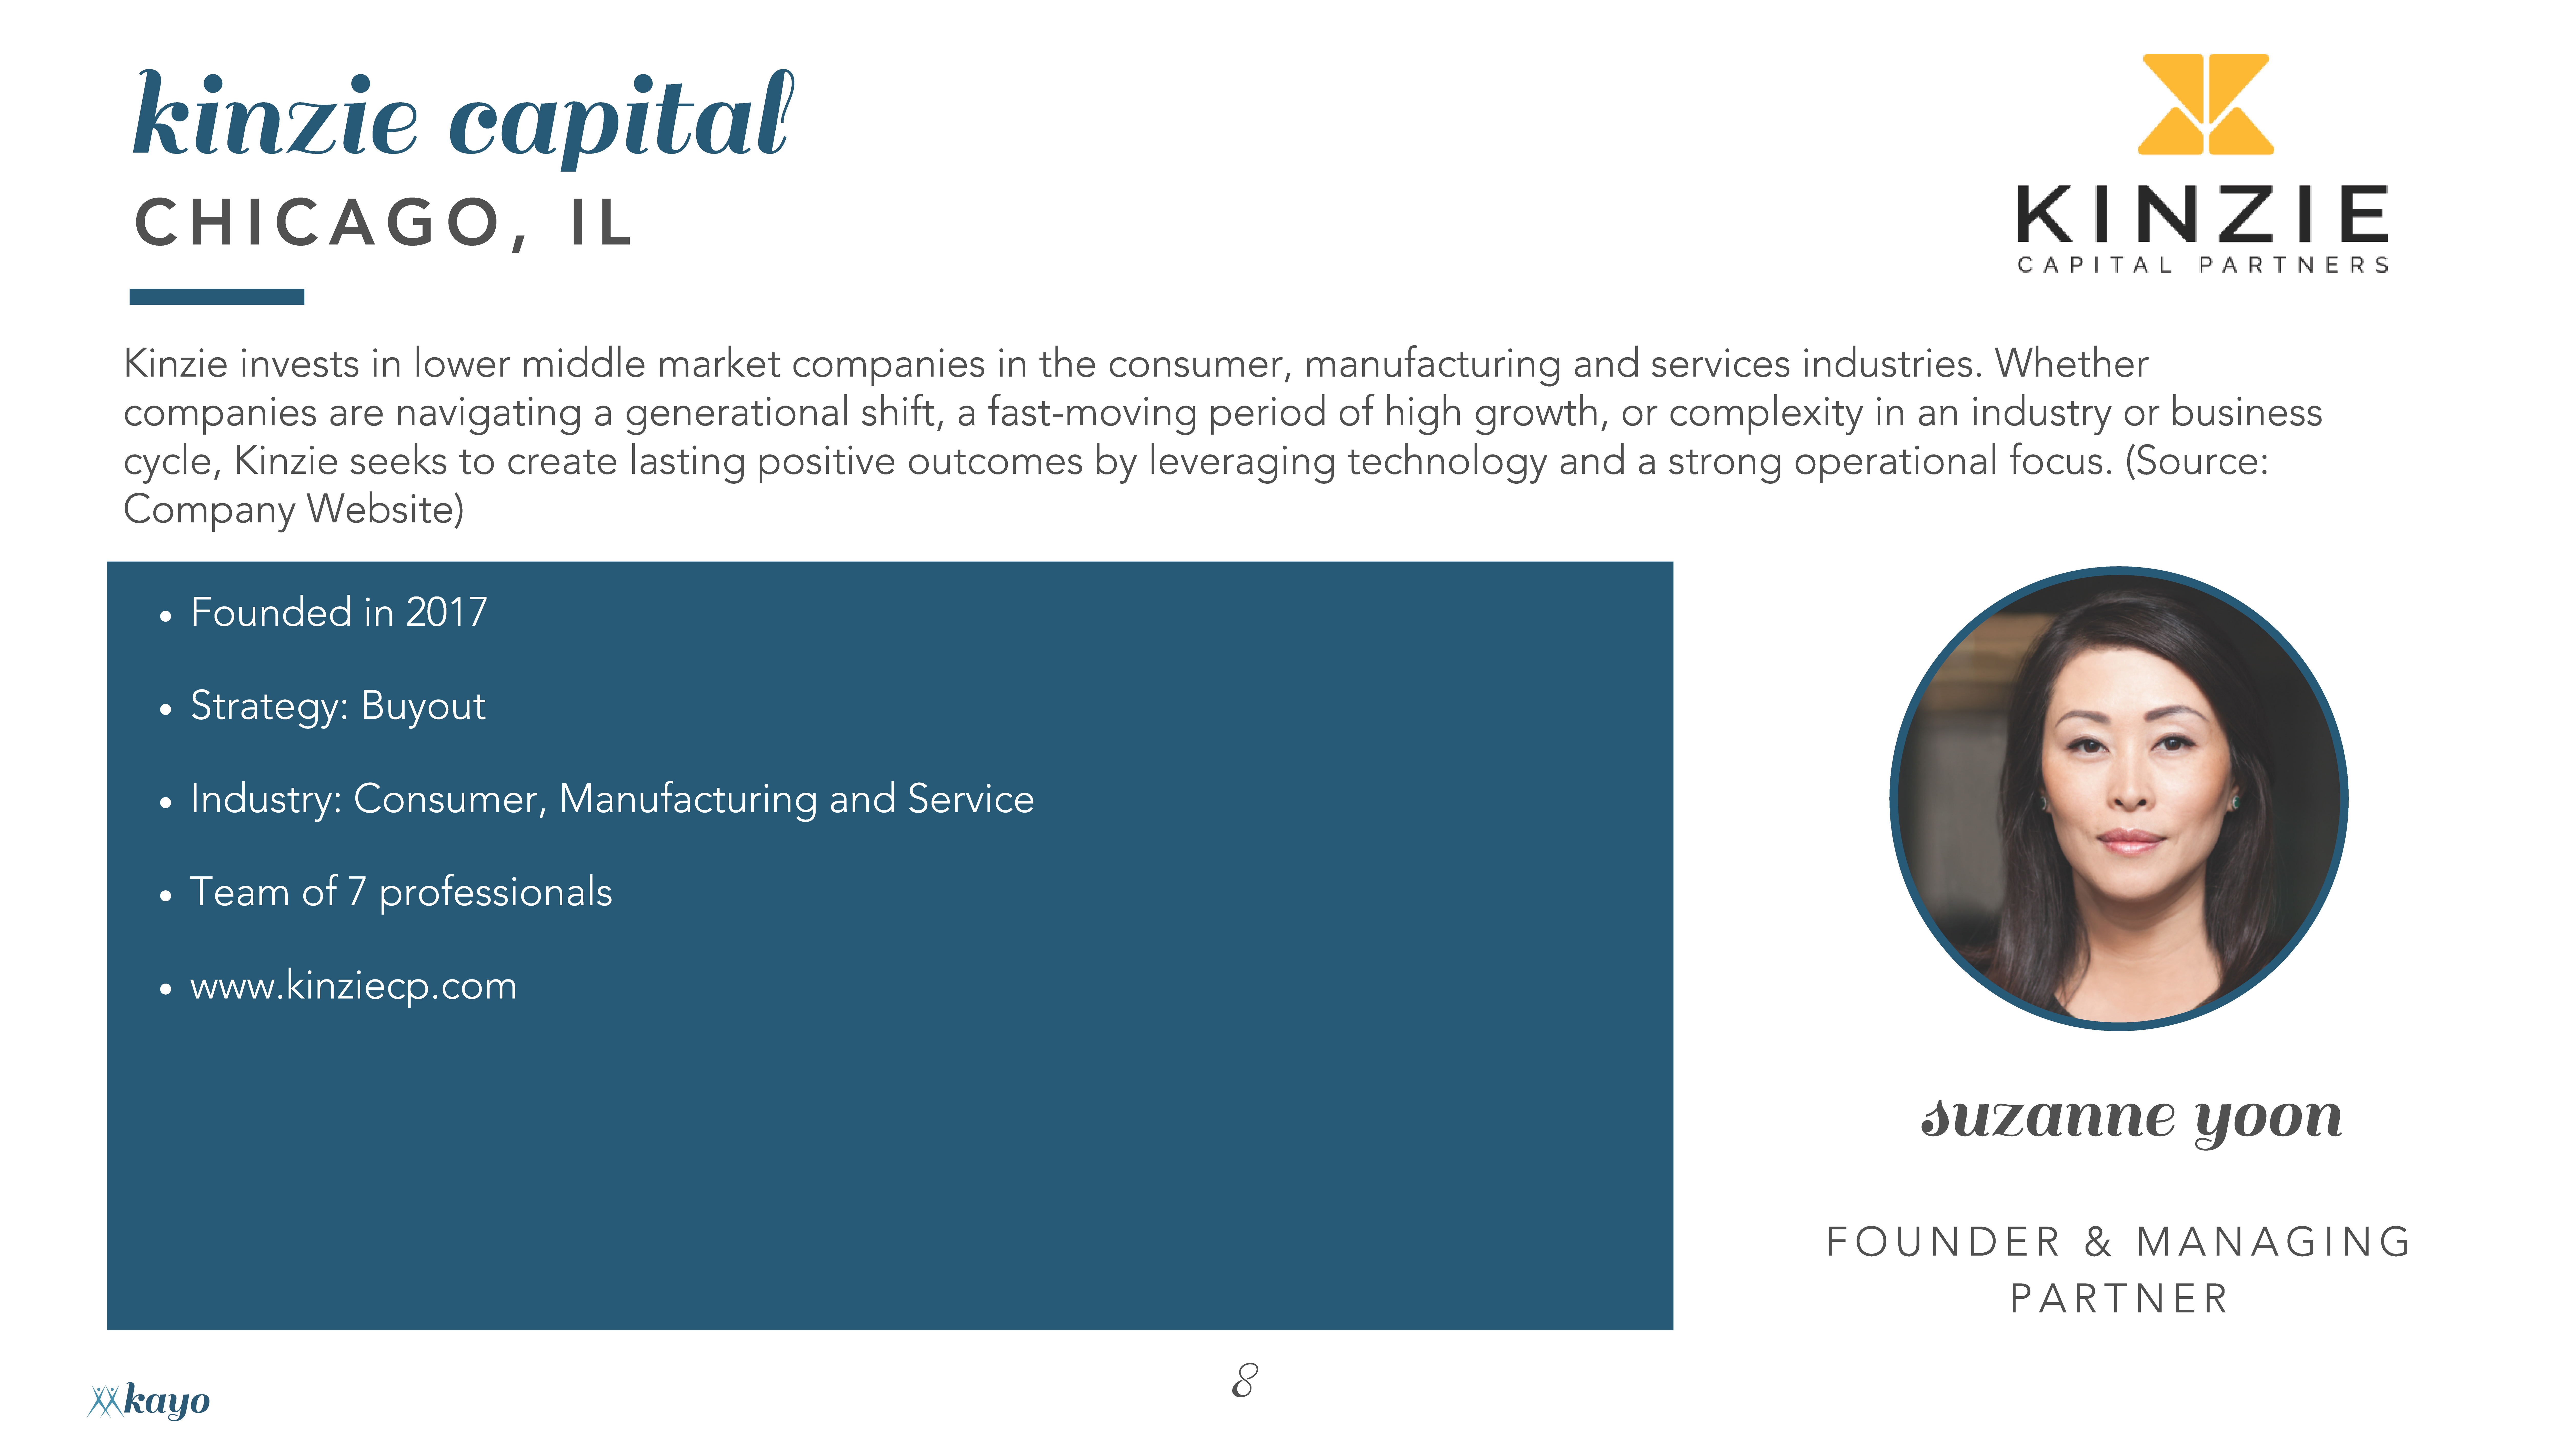 Profile page of Kinzie Capital Partners, featuring Founder & Managing Partner Suzanne Yoon